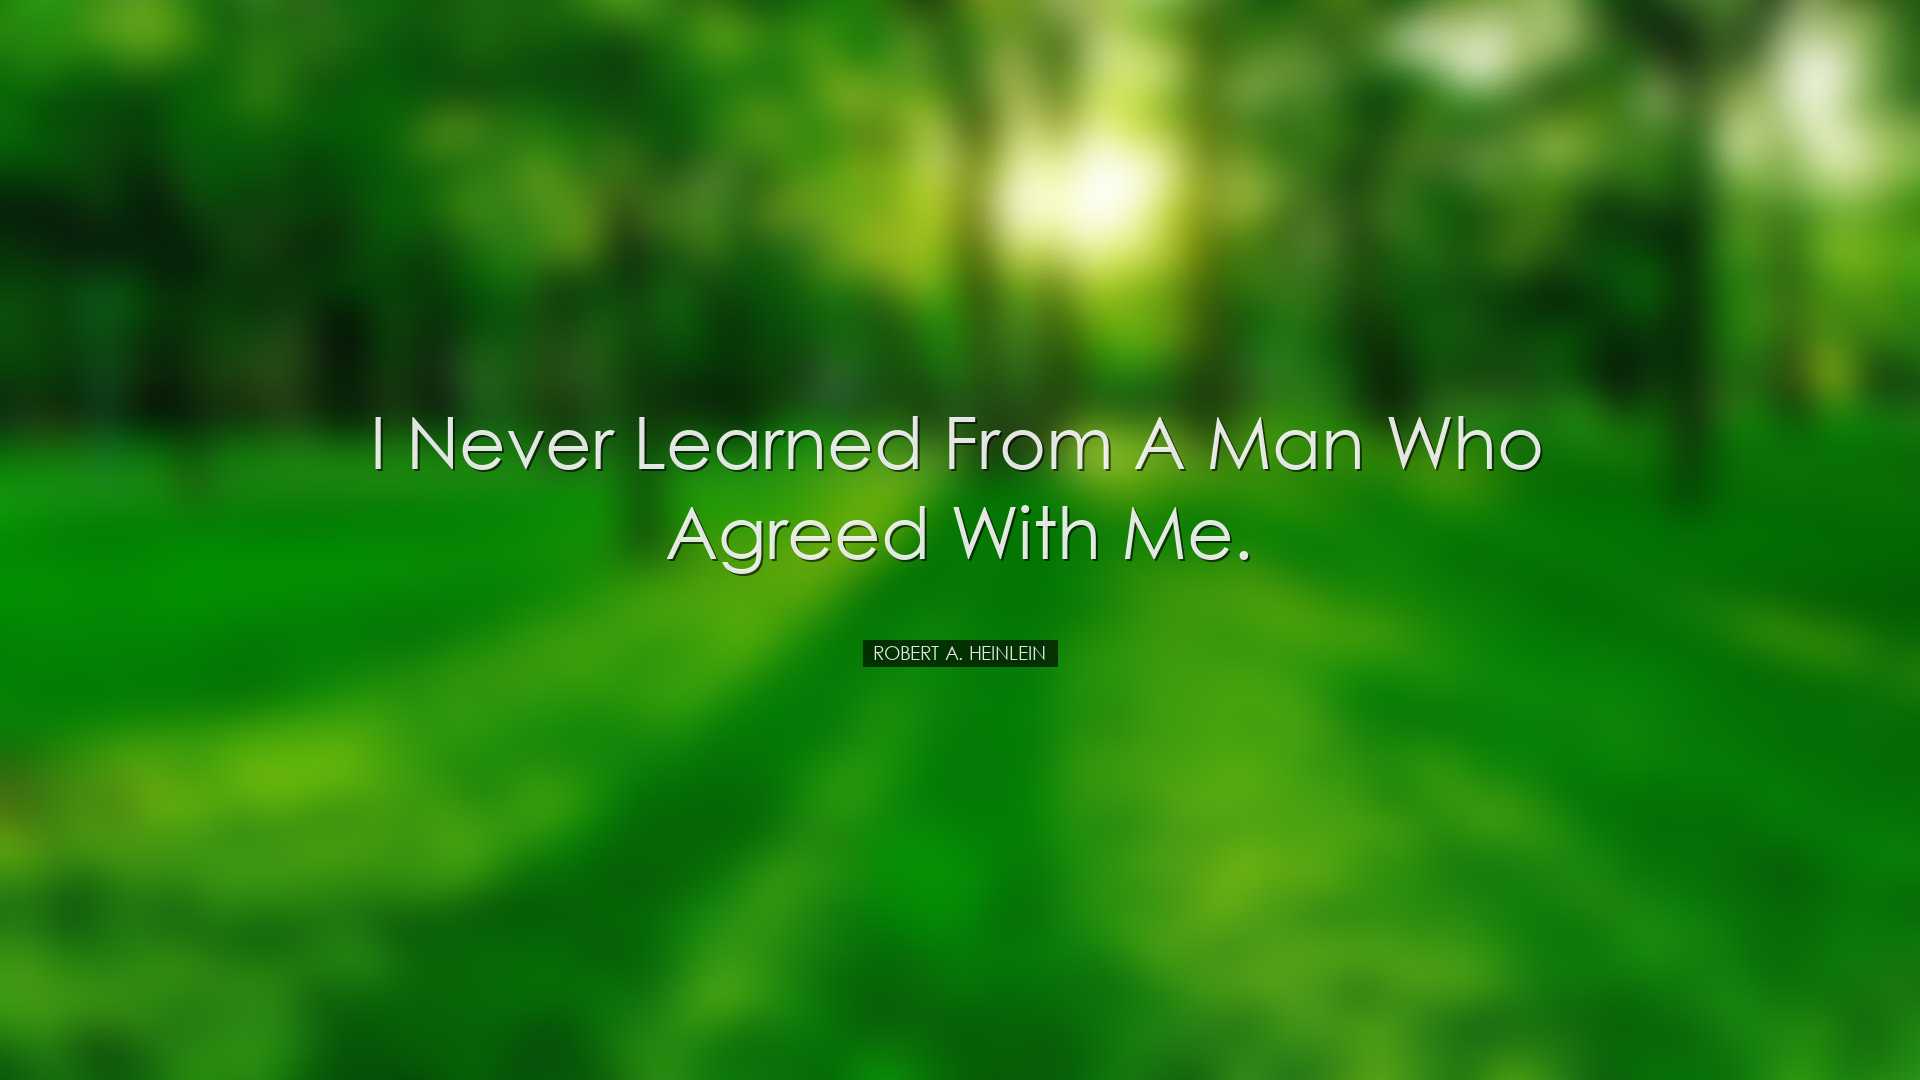 I never learned from a man who agreed with me. - Robert A. Heinlei